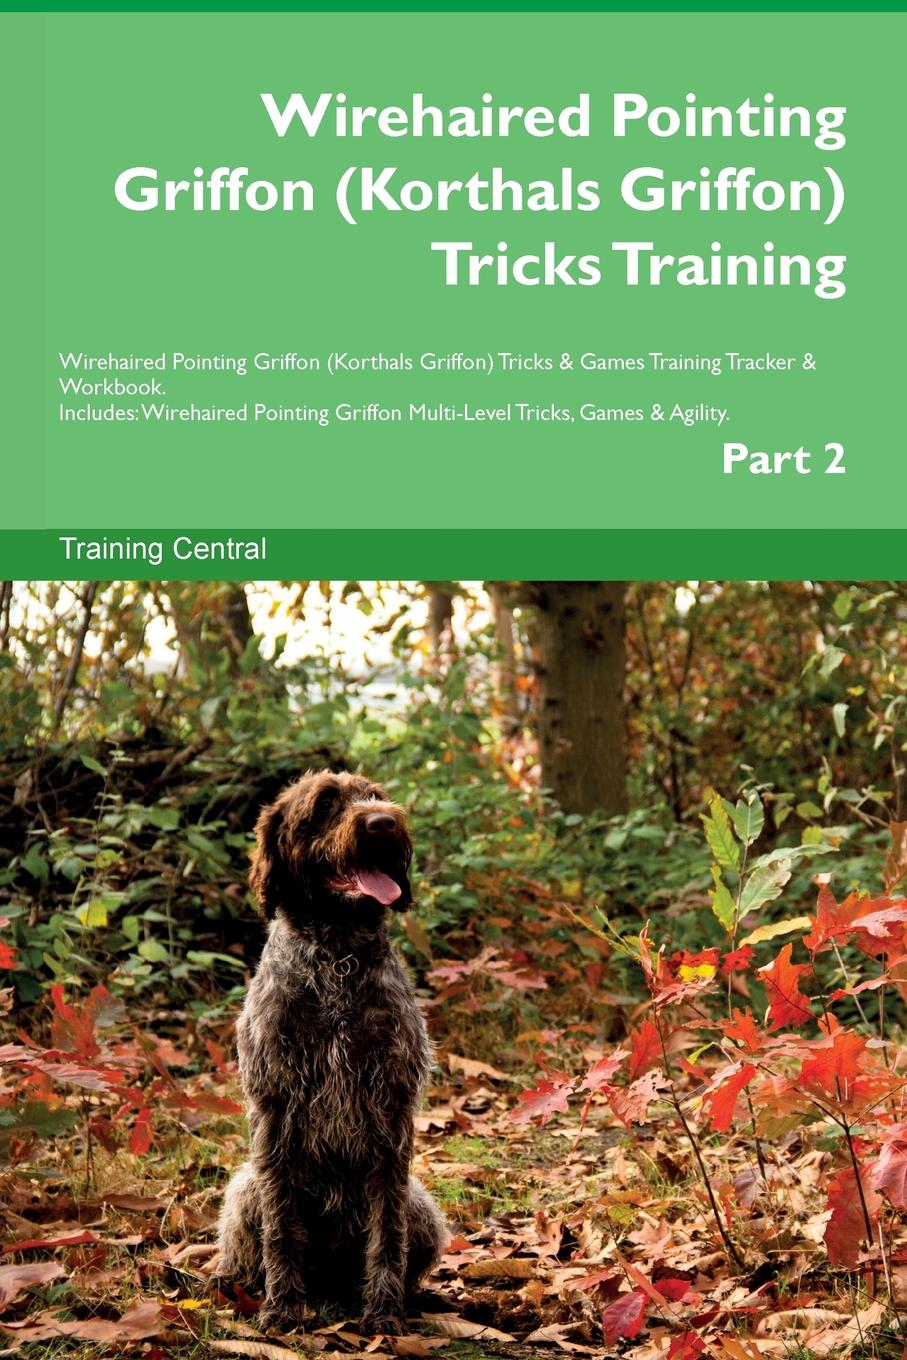 Training Central Wirehaired Pointing Griffon (Korthals Griffon) Tricks Training Wirehaired Pointing Griffon (Korthals Griffon) Tricks . Games Training Tracker . Workbook. Includes. Wirehaired Pointing Griffon Multi-Level Tricks, Games . Agility. Part 2